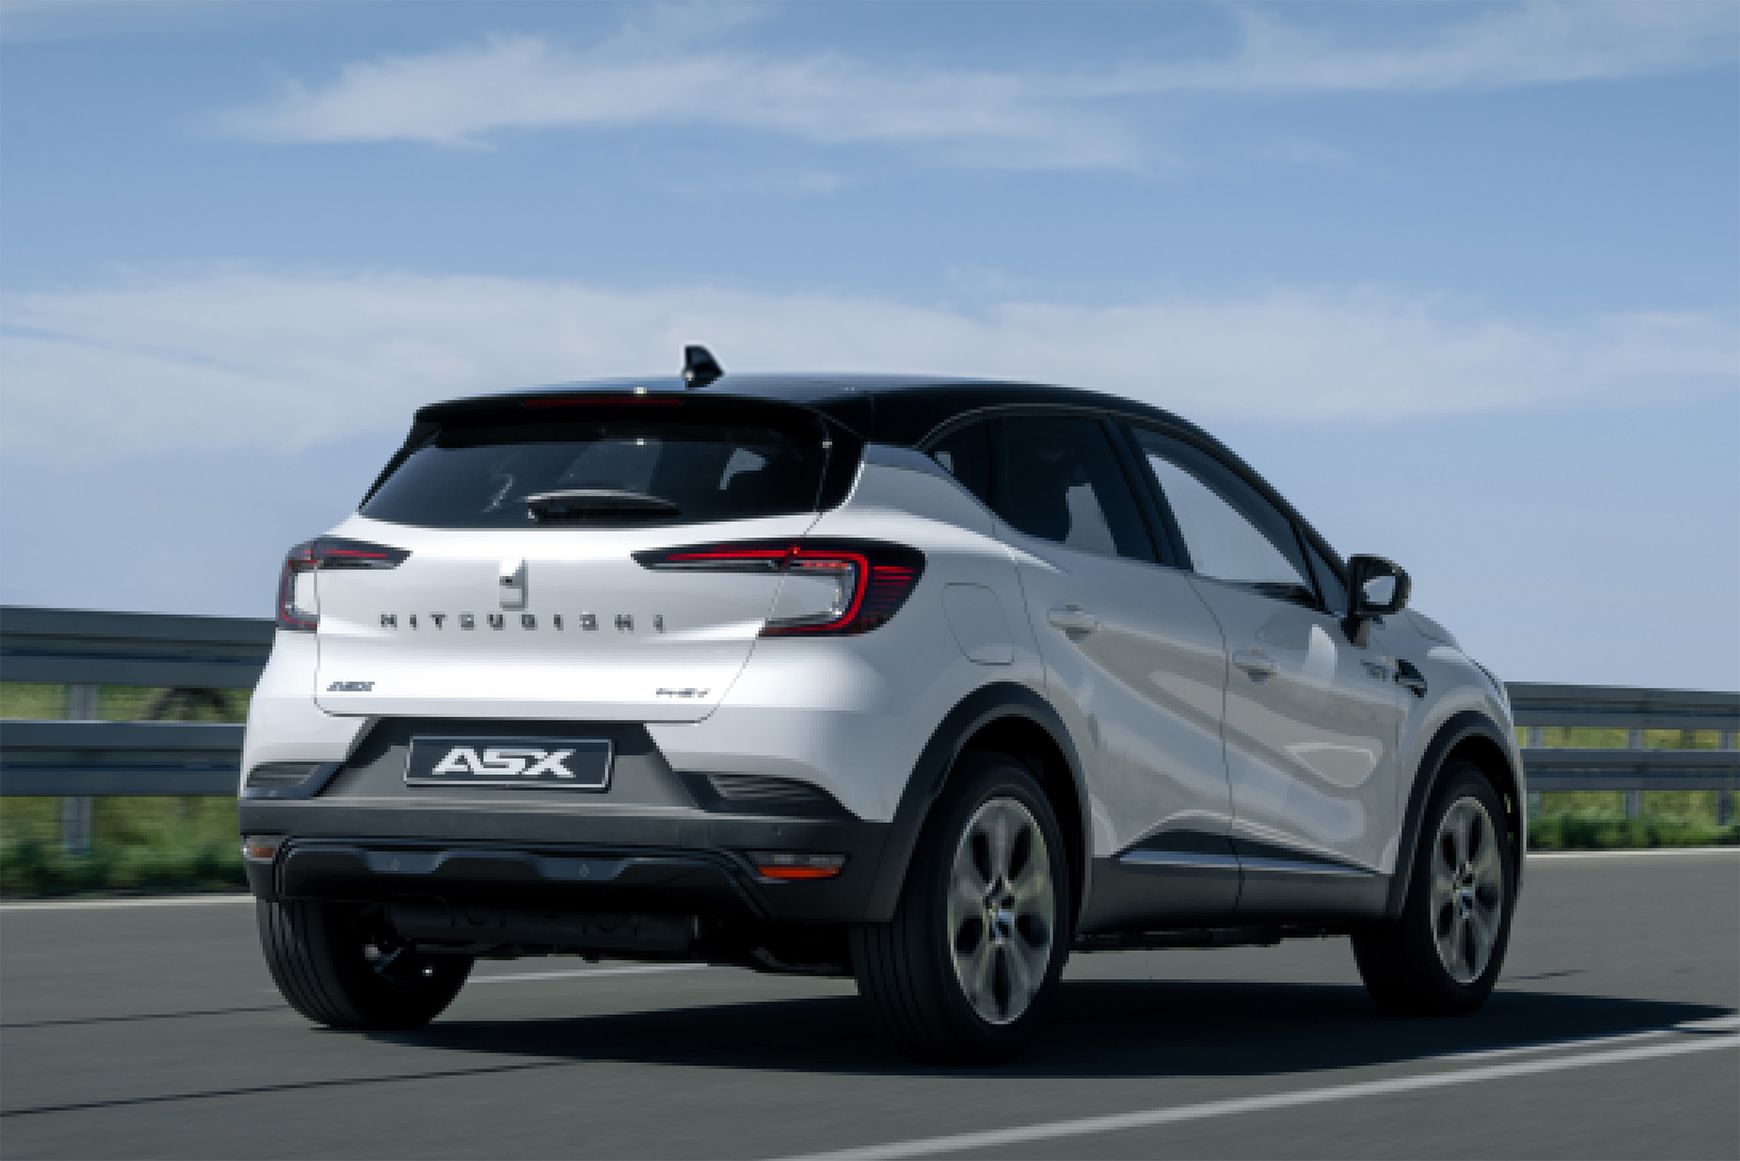 The 2023 Mitsubishi ASX is the ultimate road-going sedan